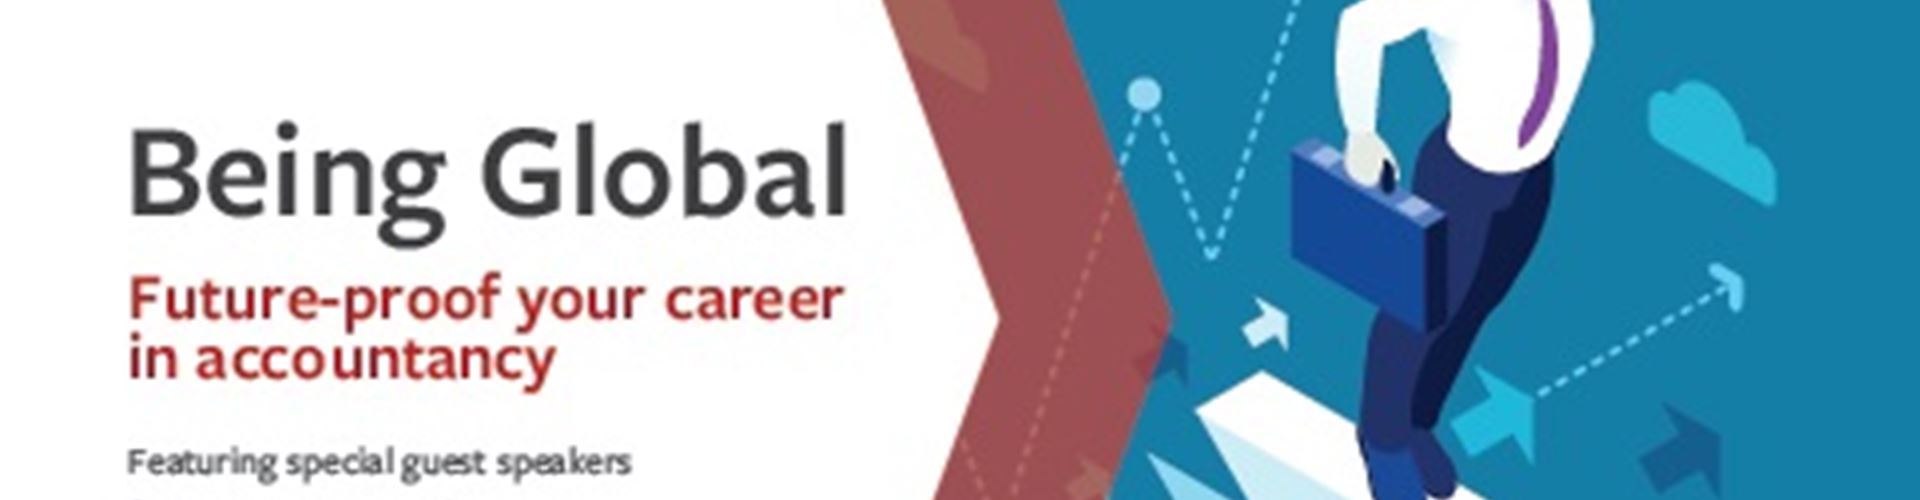 Being Global - Future-proof your career in accountancy